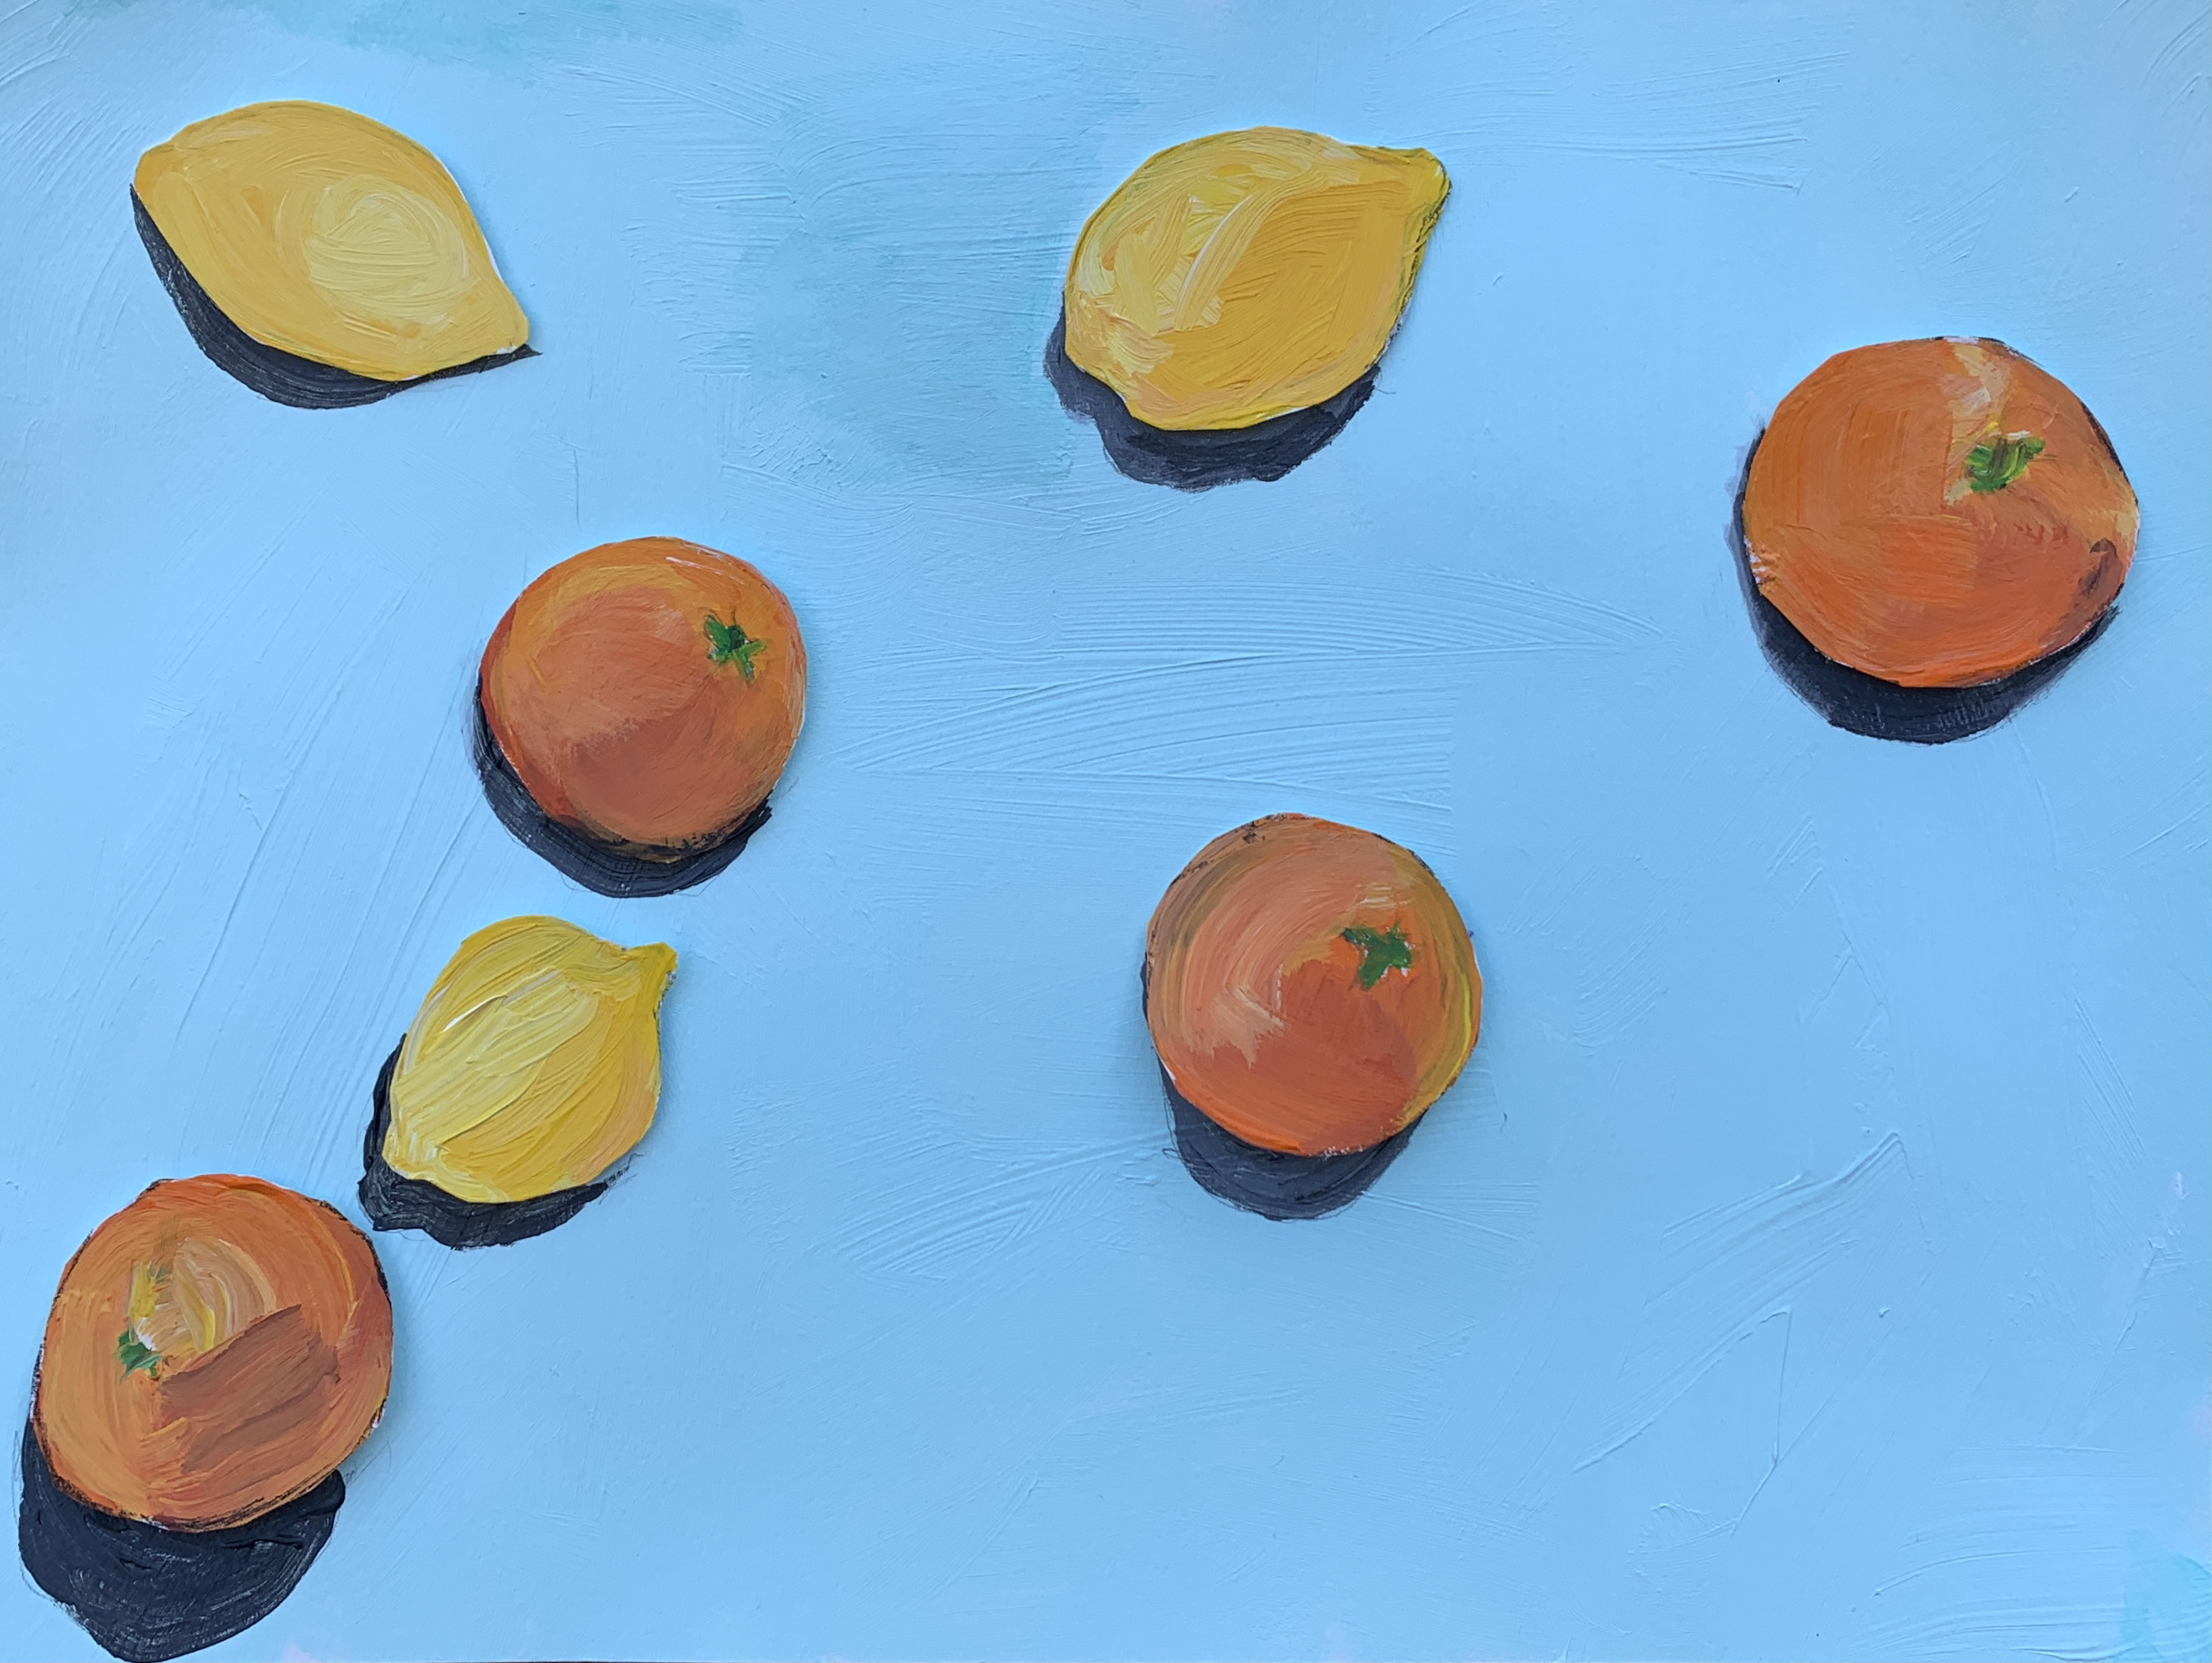 Painting of oranges and lemons on blue background